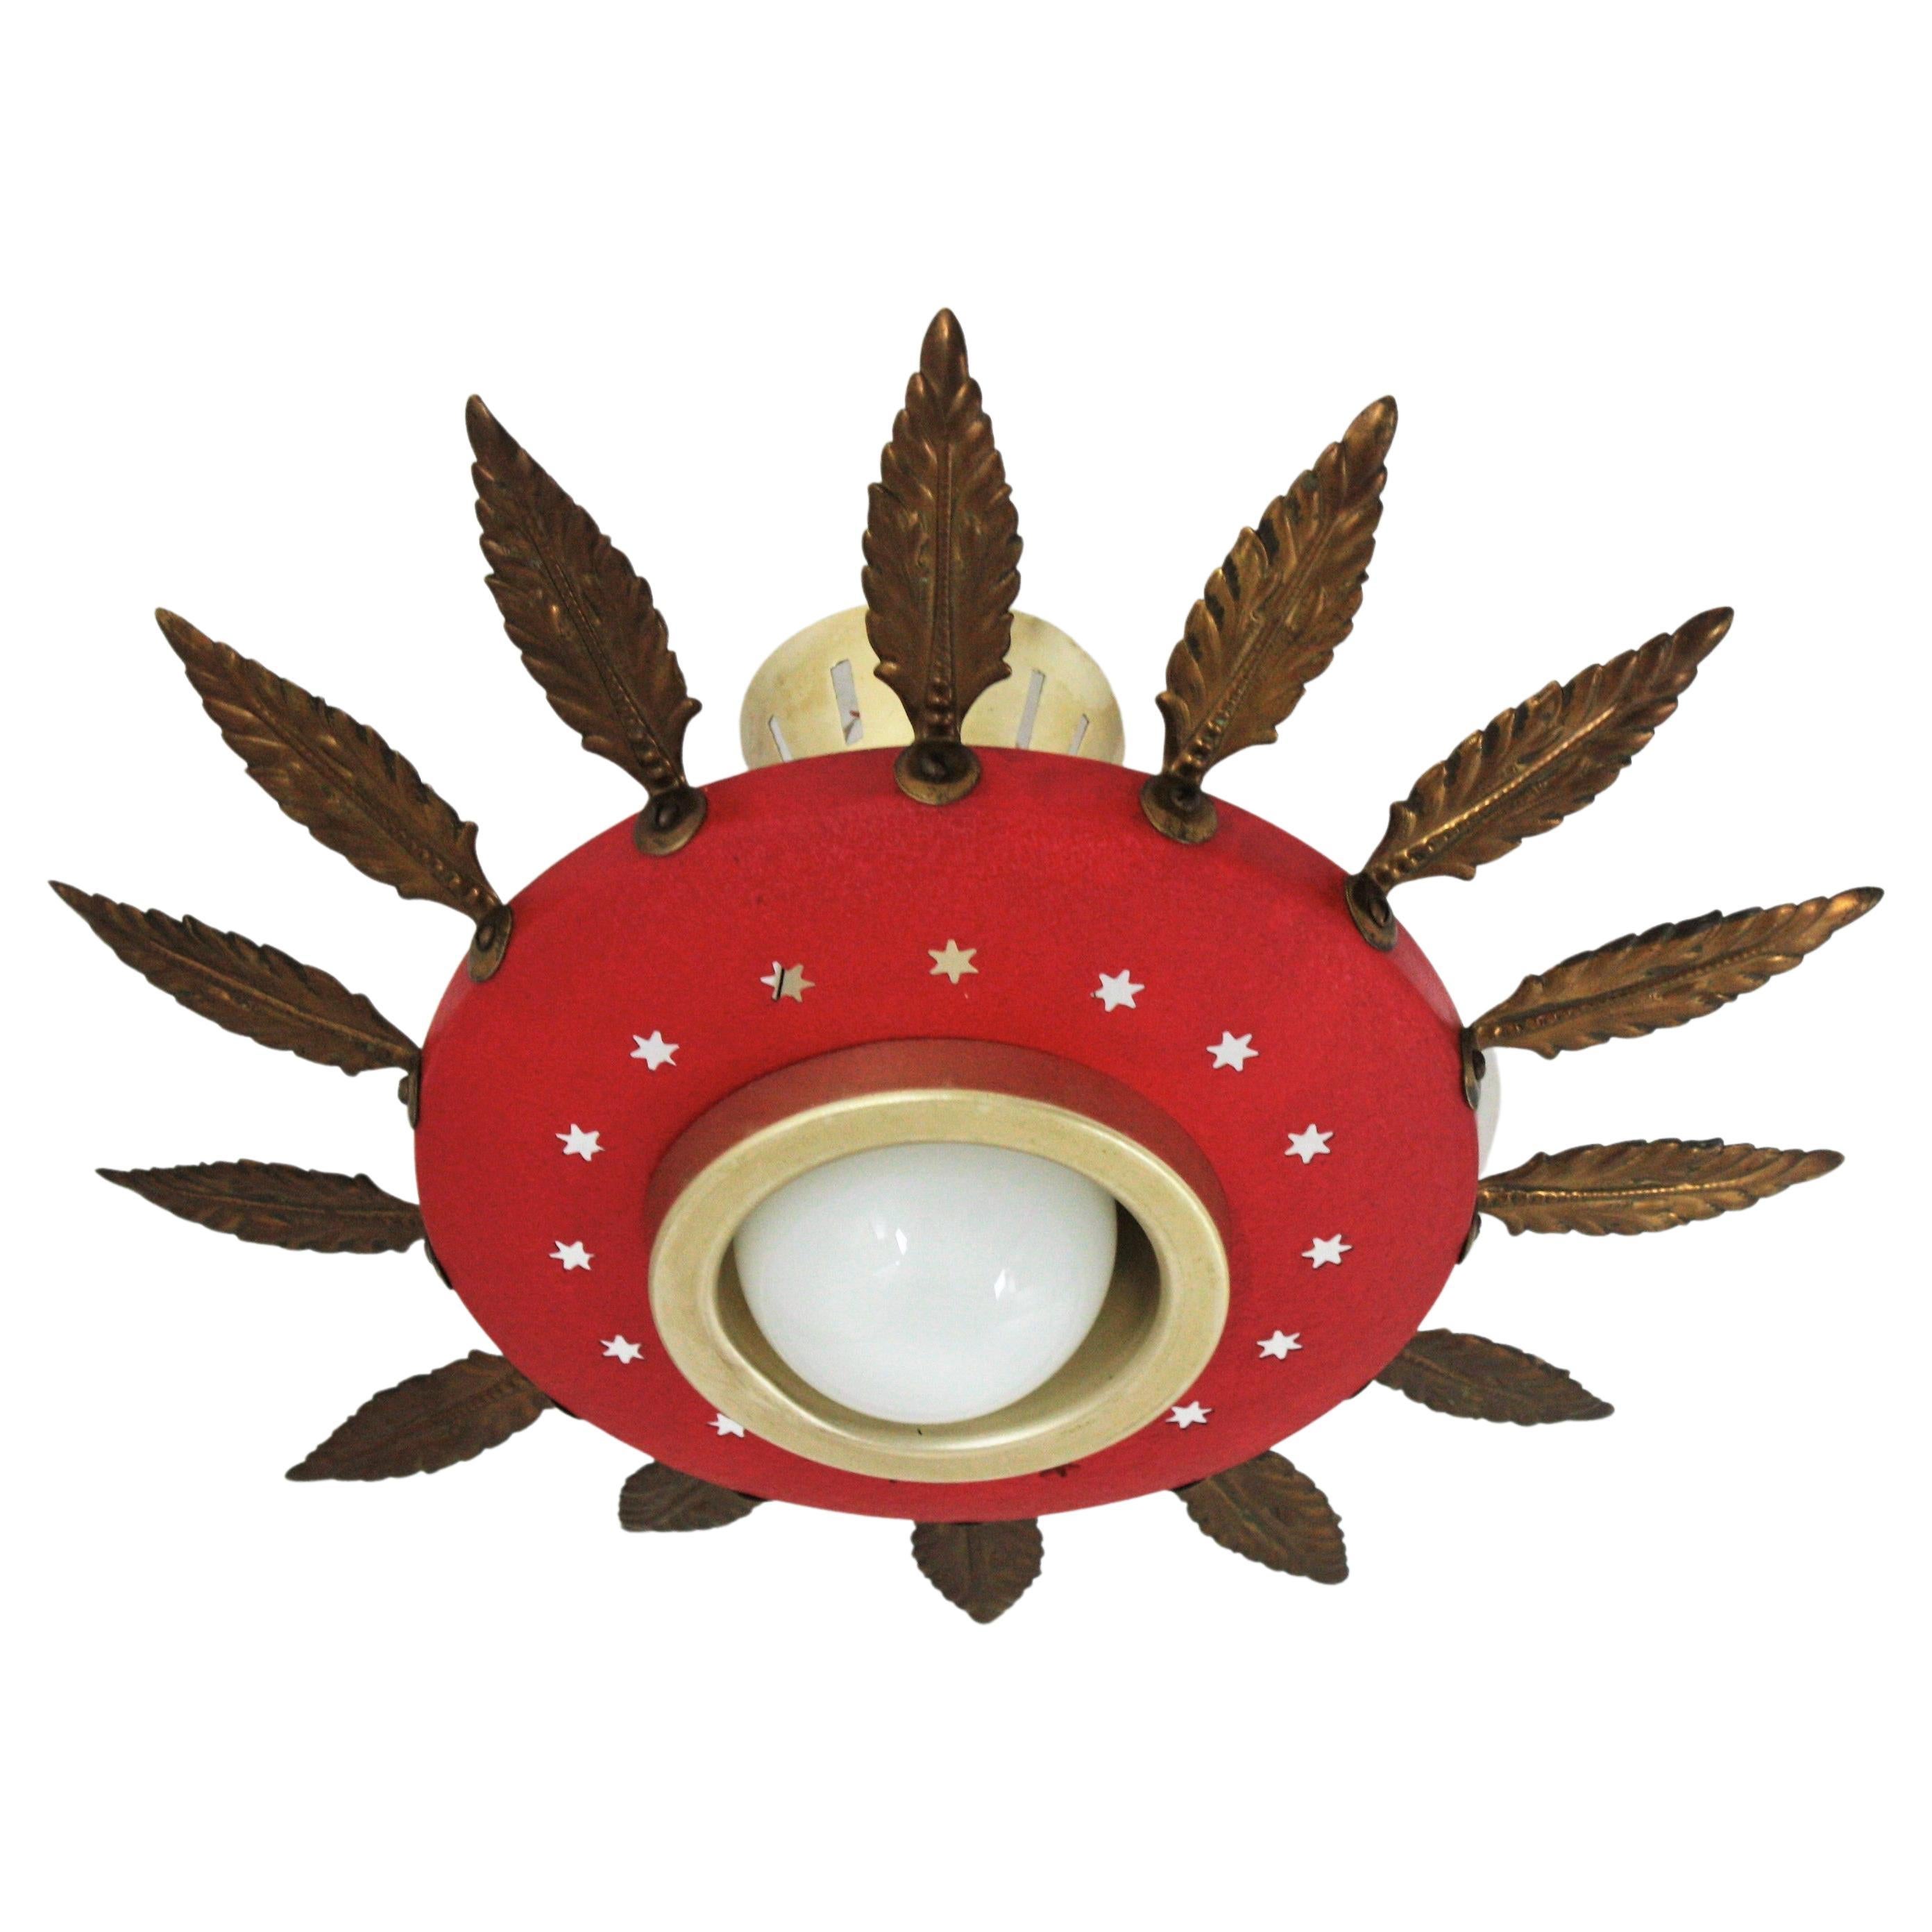 Mid-Century Modern red lacquered metal and brass sunburst suspension light, chandelier or light fixture. Italy, 1950s.
This eye-catching ceiling lamp features a red lacquered metal shade adorned by star shaped perforations. It is surrounded by